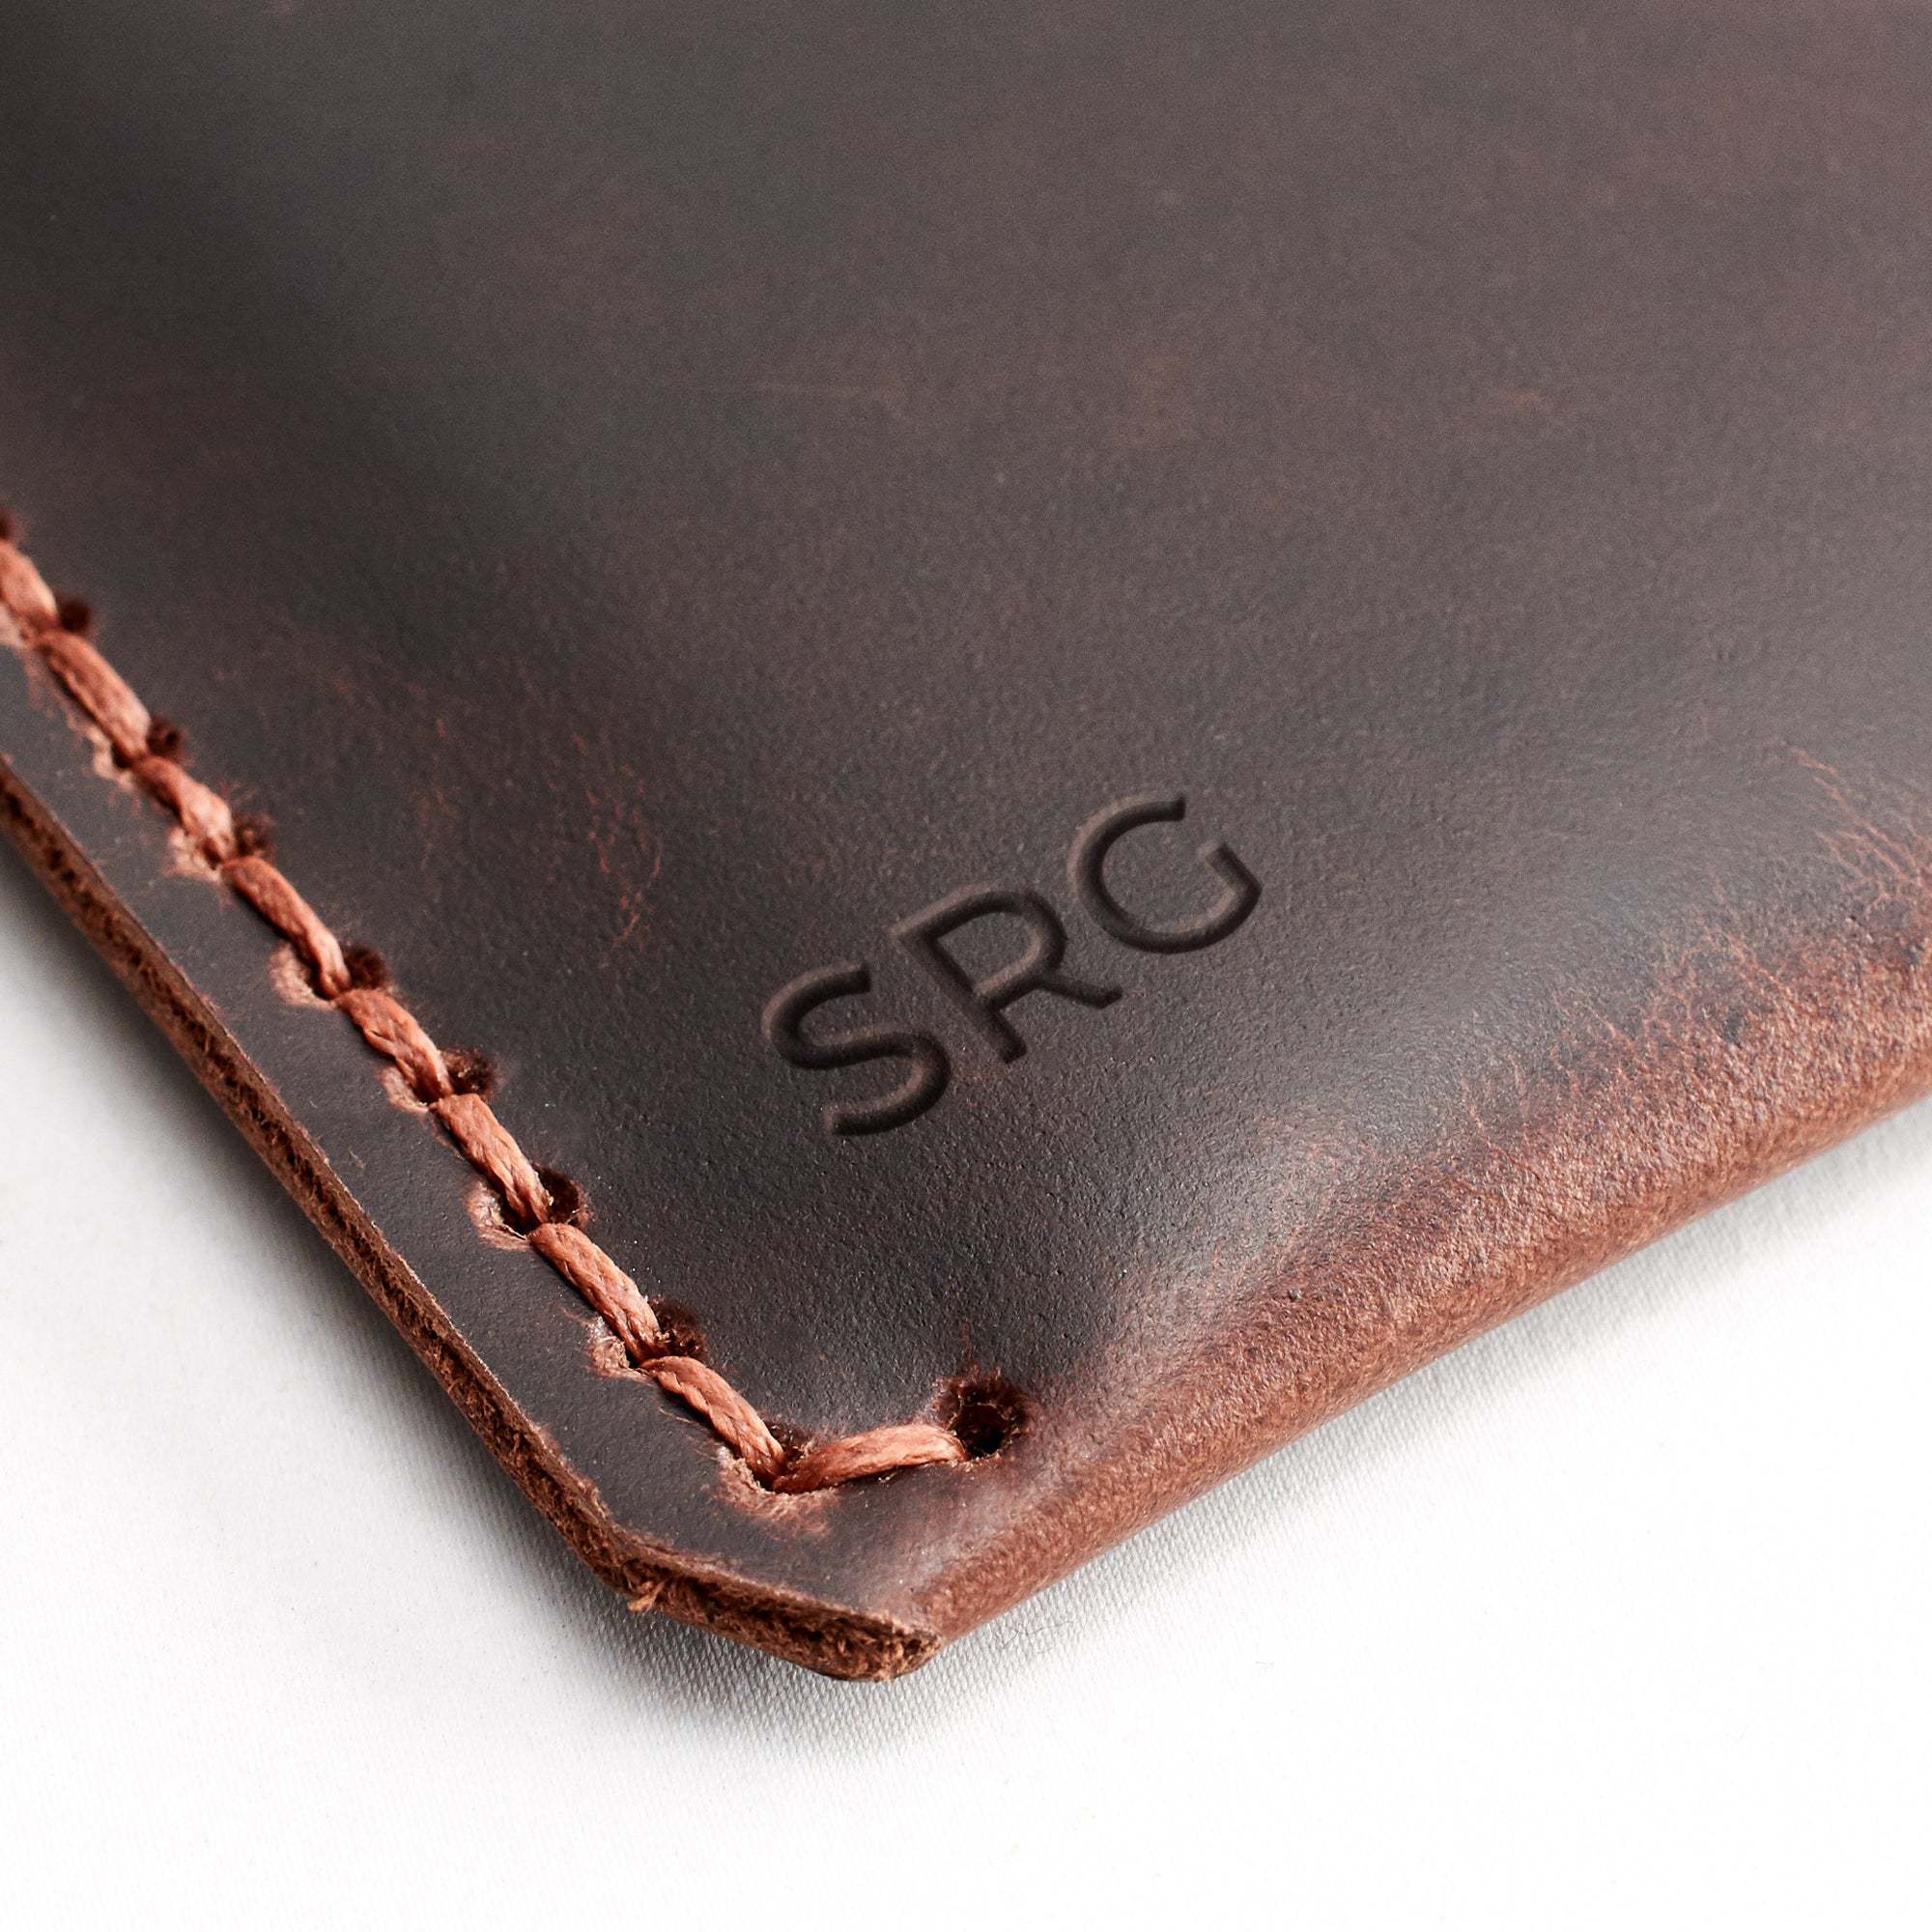 Custom Embossing. iPad Sleeve. iPad Leather Case Distressed Cognac With Apple Pencil Holder by Capra Leather